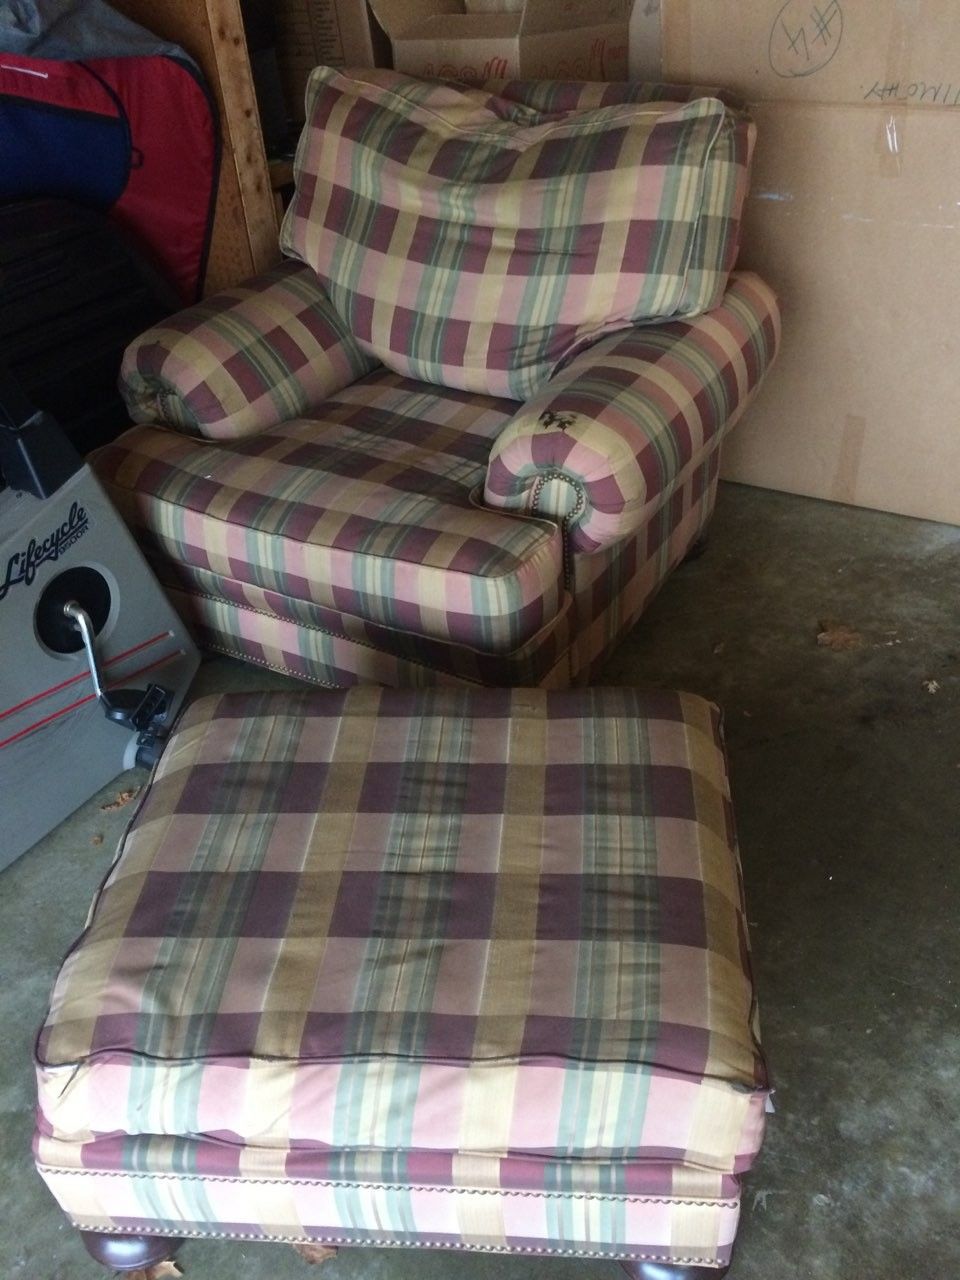 Easy chair and ottoman